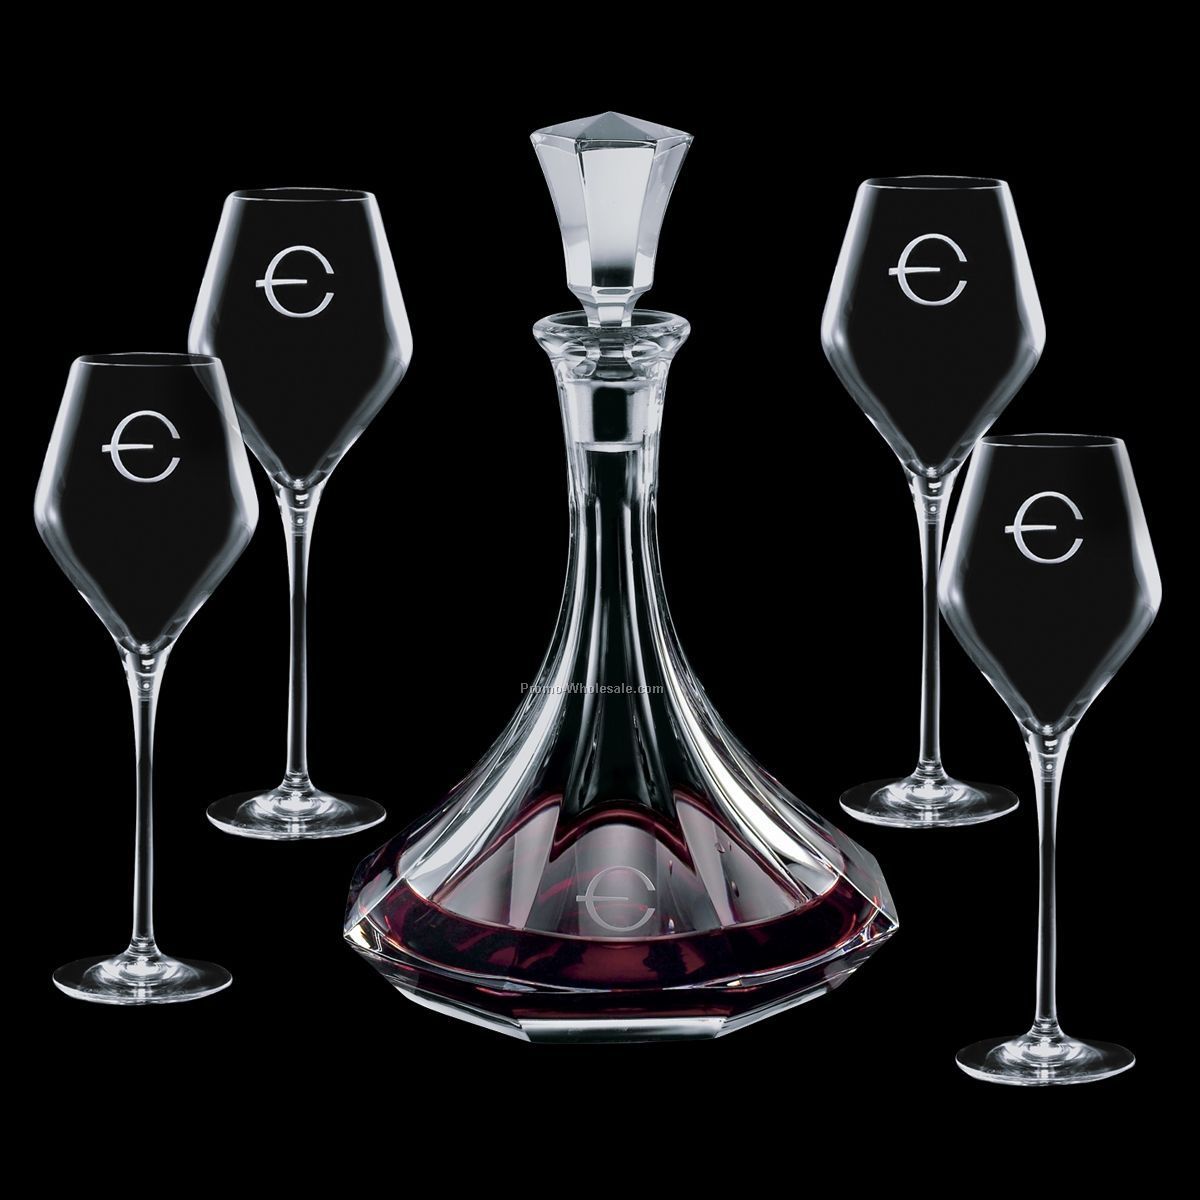 30 Oz. Europa Crystal Decanter And 4 Wine Glasses